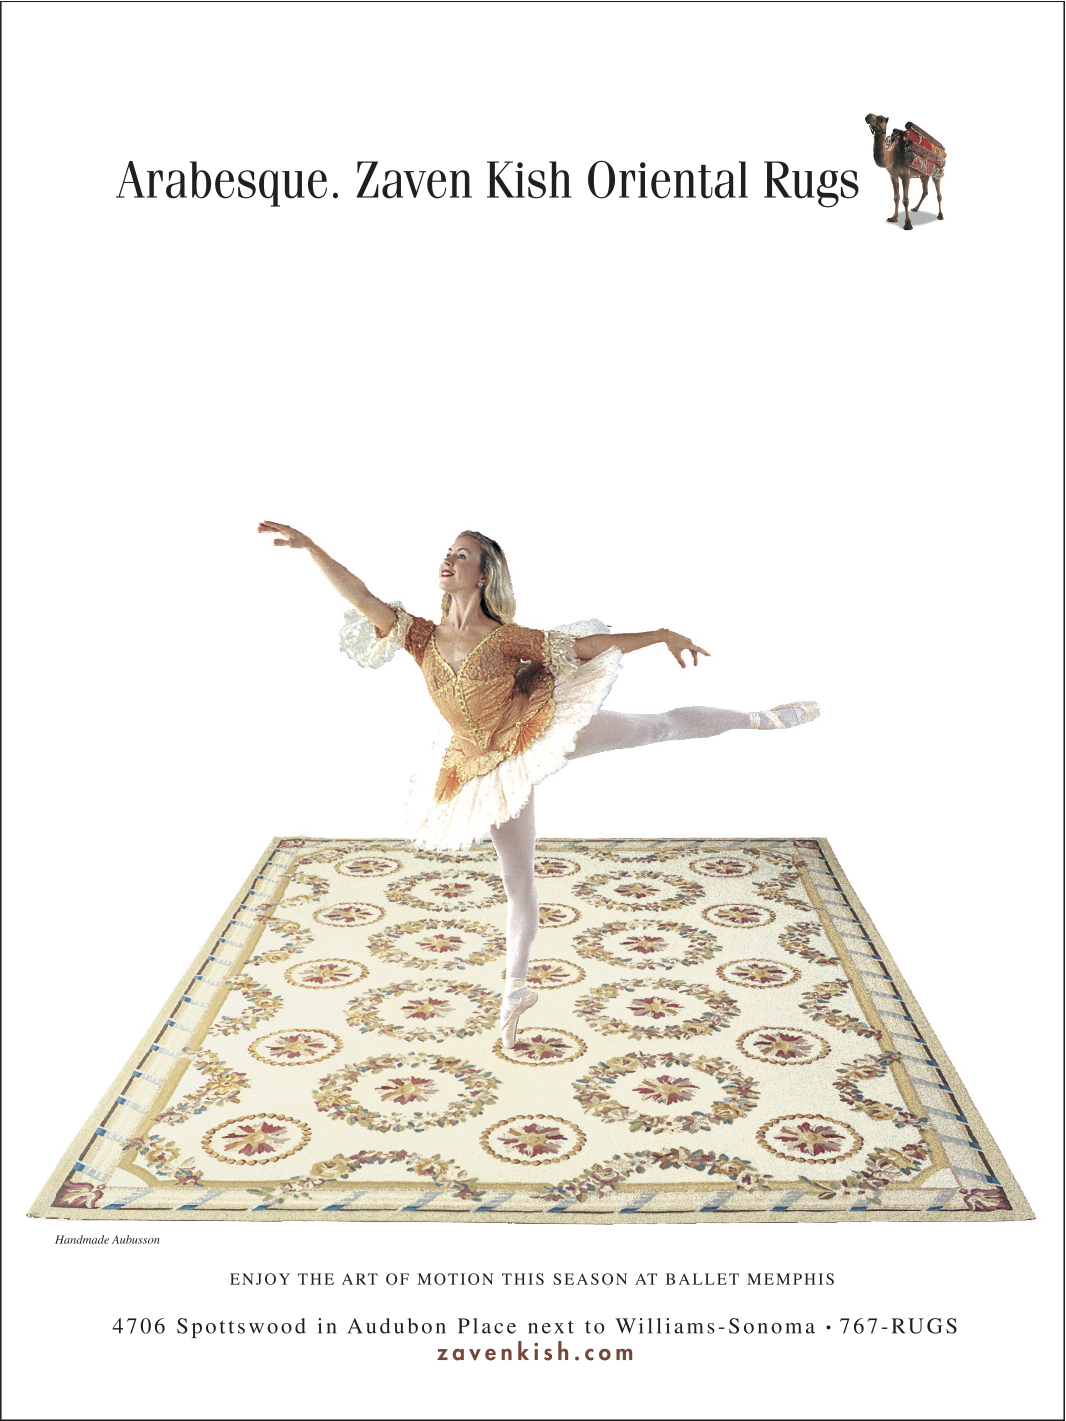  Zaven Kish Oriental Rugs full-page magazine ad 2  Branding creative, copywriting and design by Chuck Mitchell  Photograph by API Photographers, Memphis  © Chuck Mitchell  All rights reserved. 